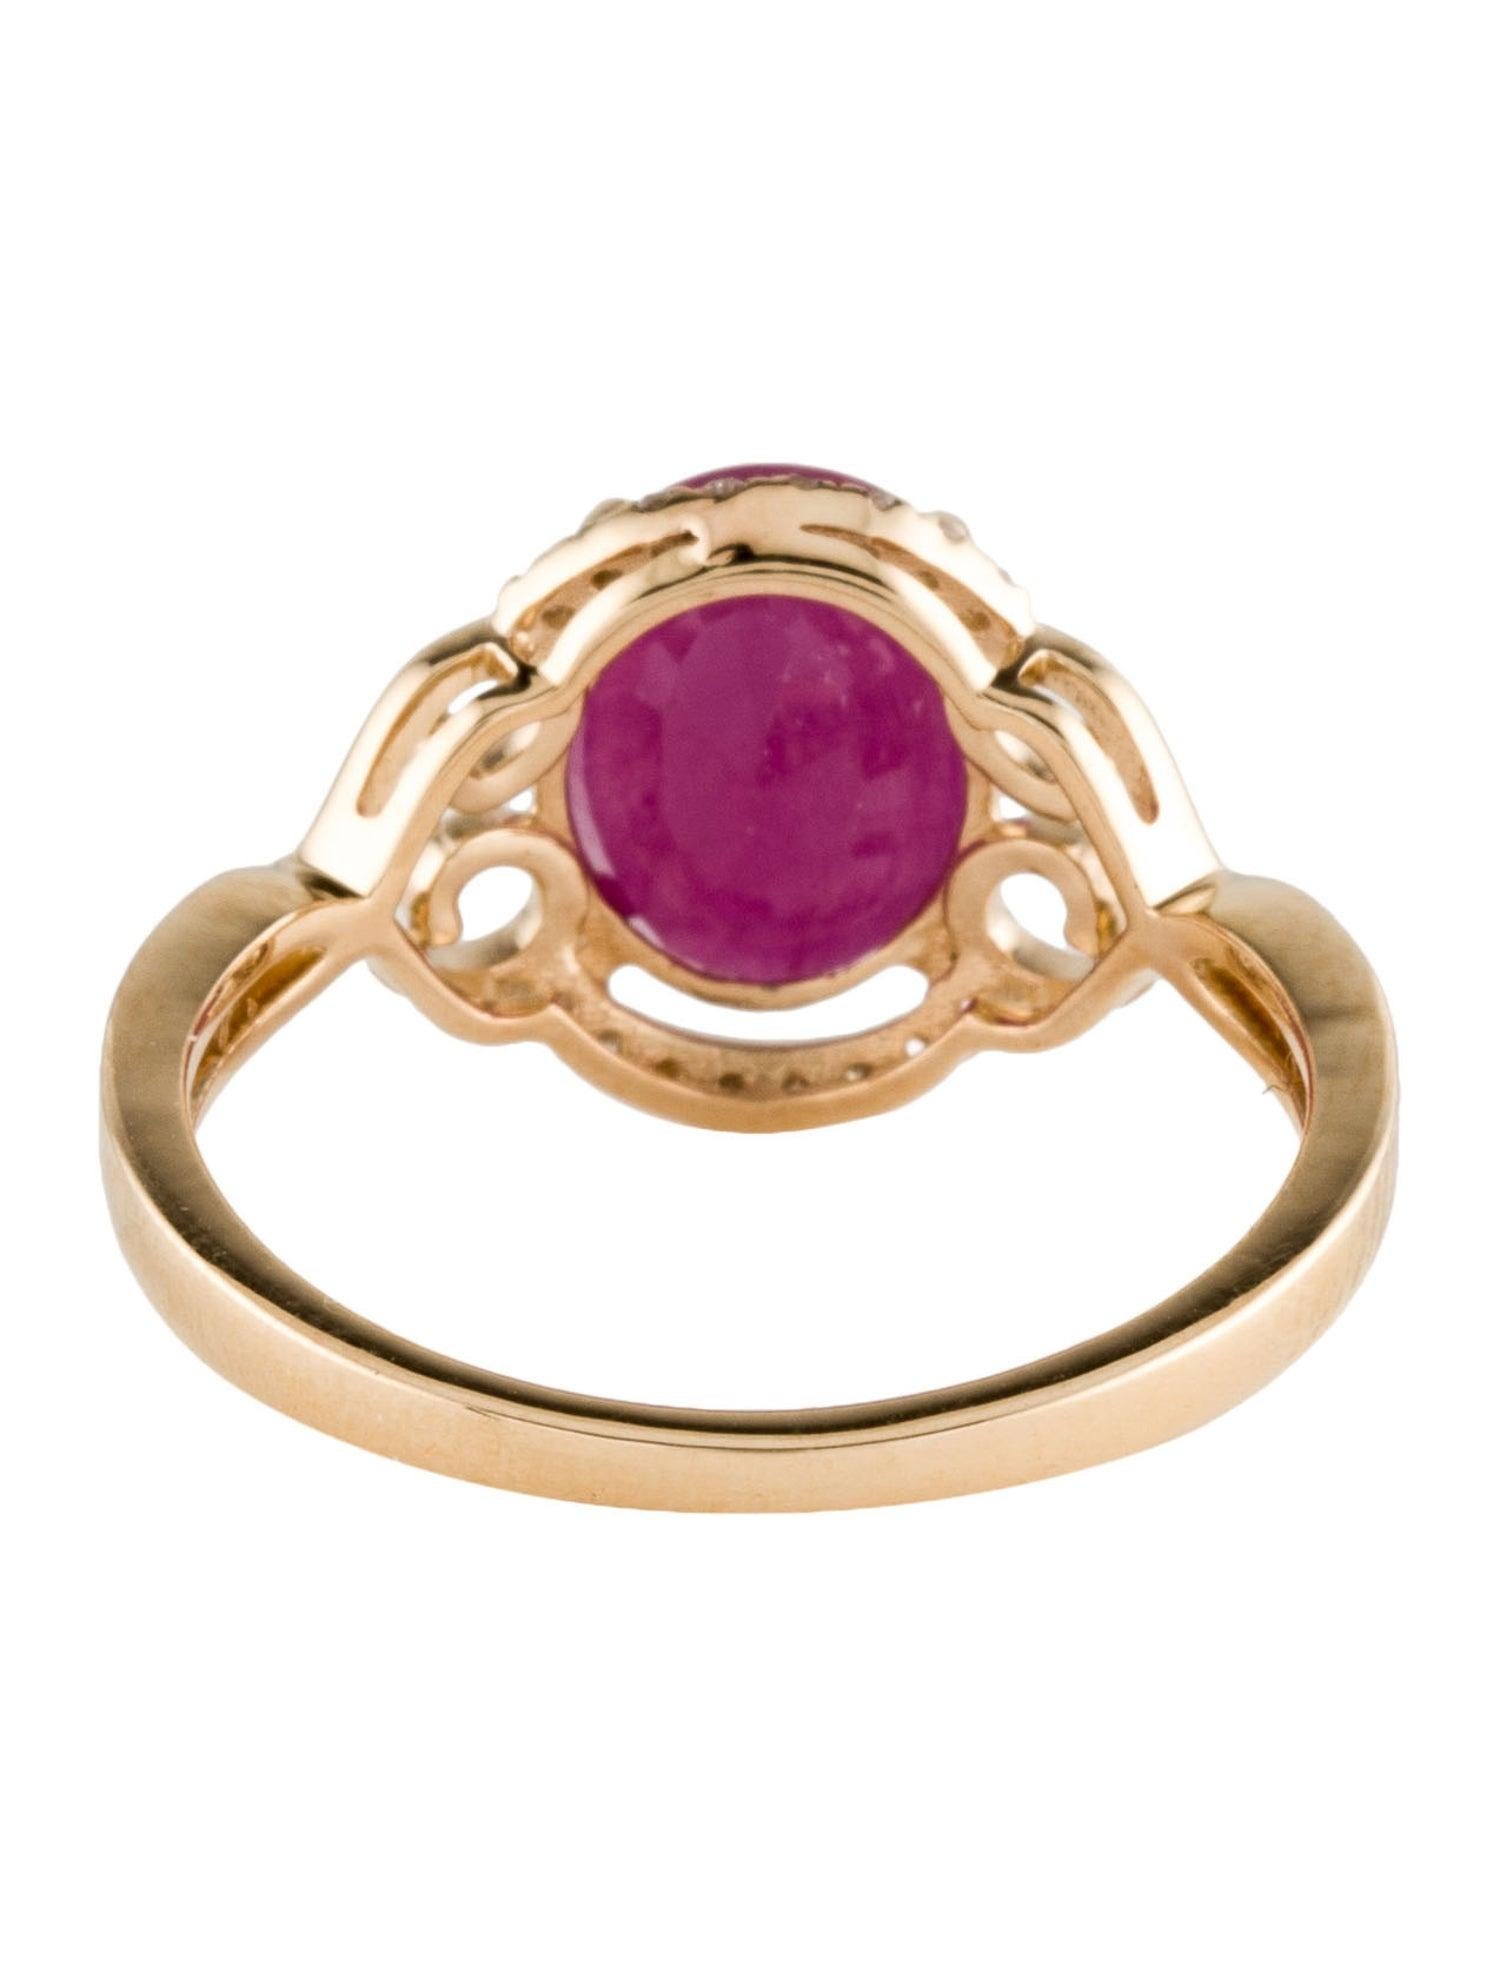 Oval Cut Gorgeous 14K Ruby & Diamond Cluster Cocktail Ring - 2.56ct Gemstones - Size 8 For Sale